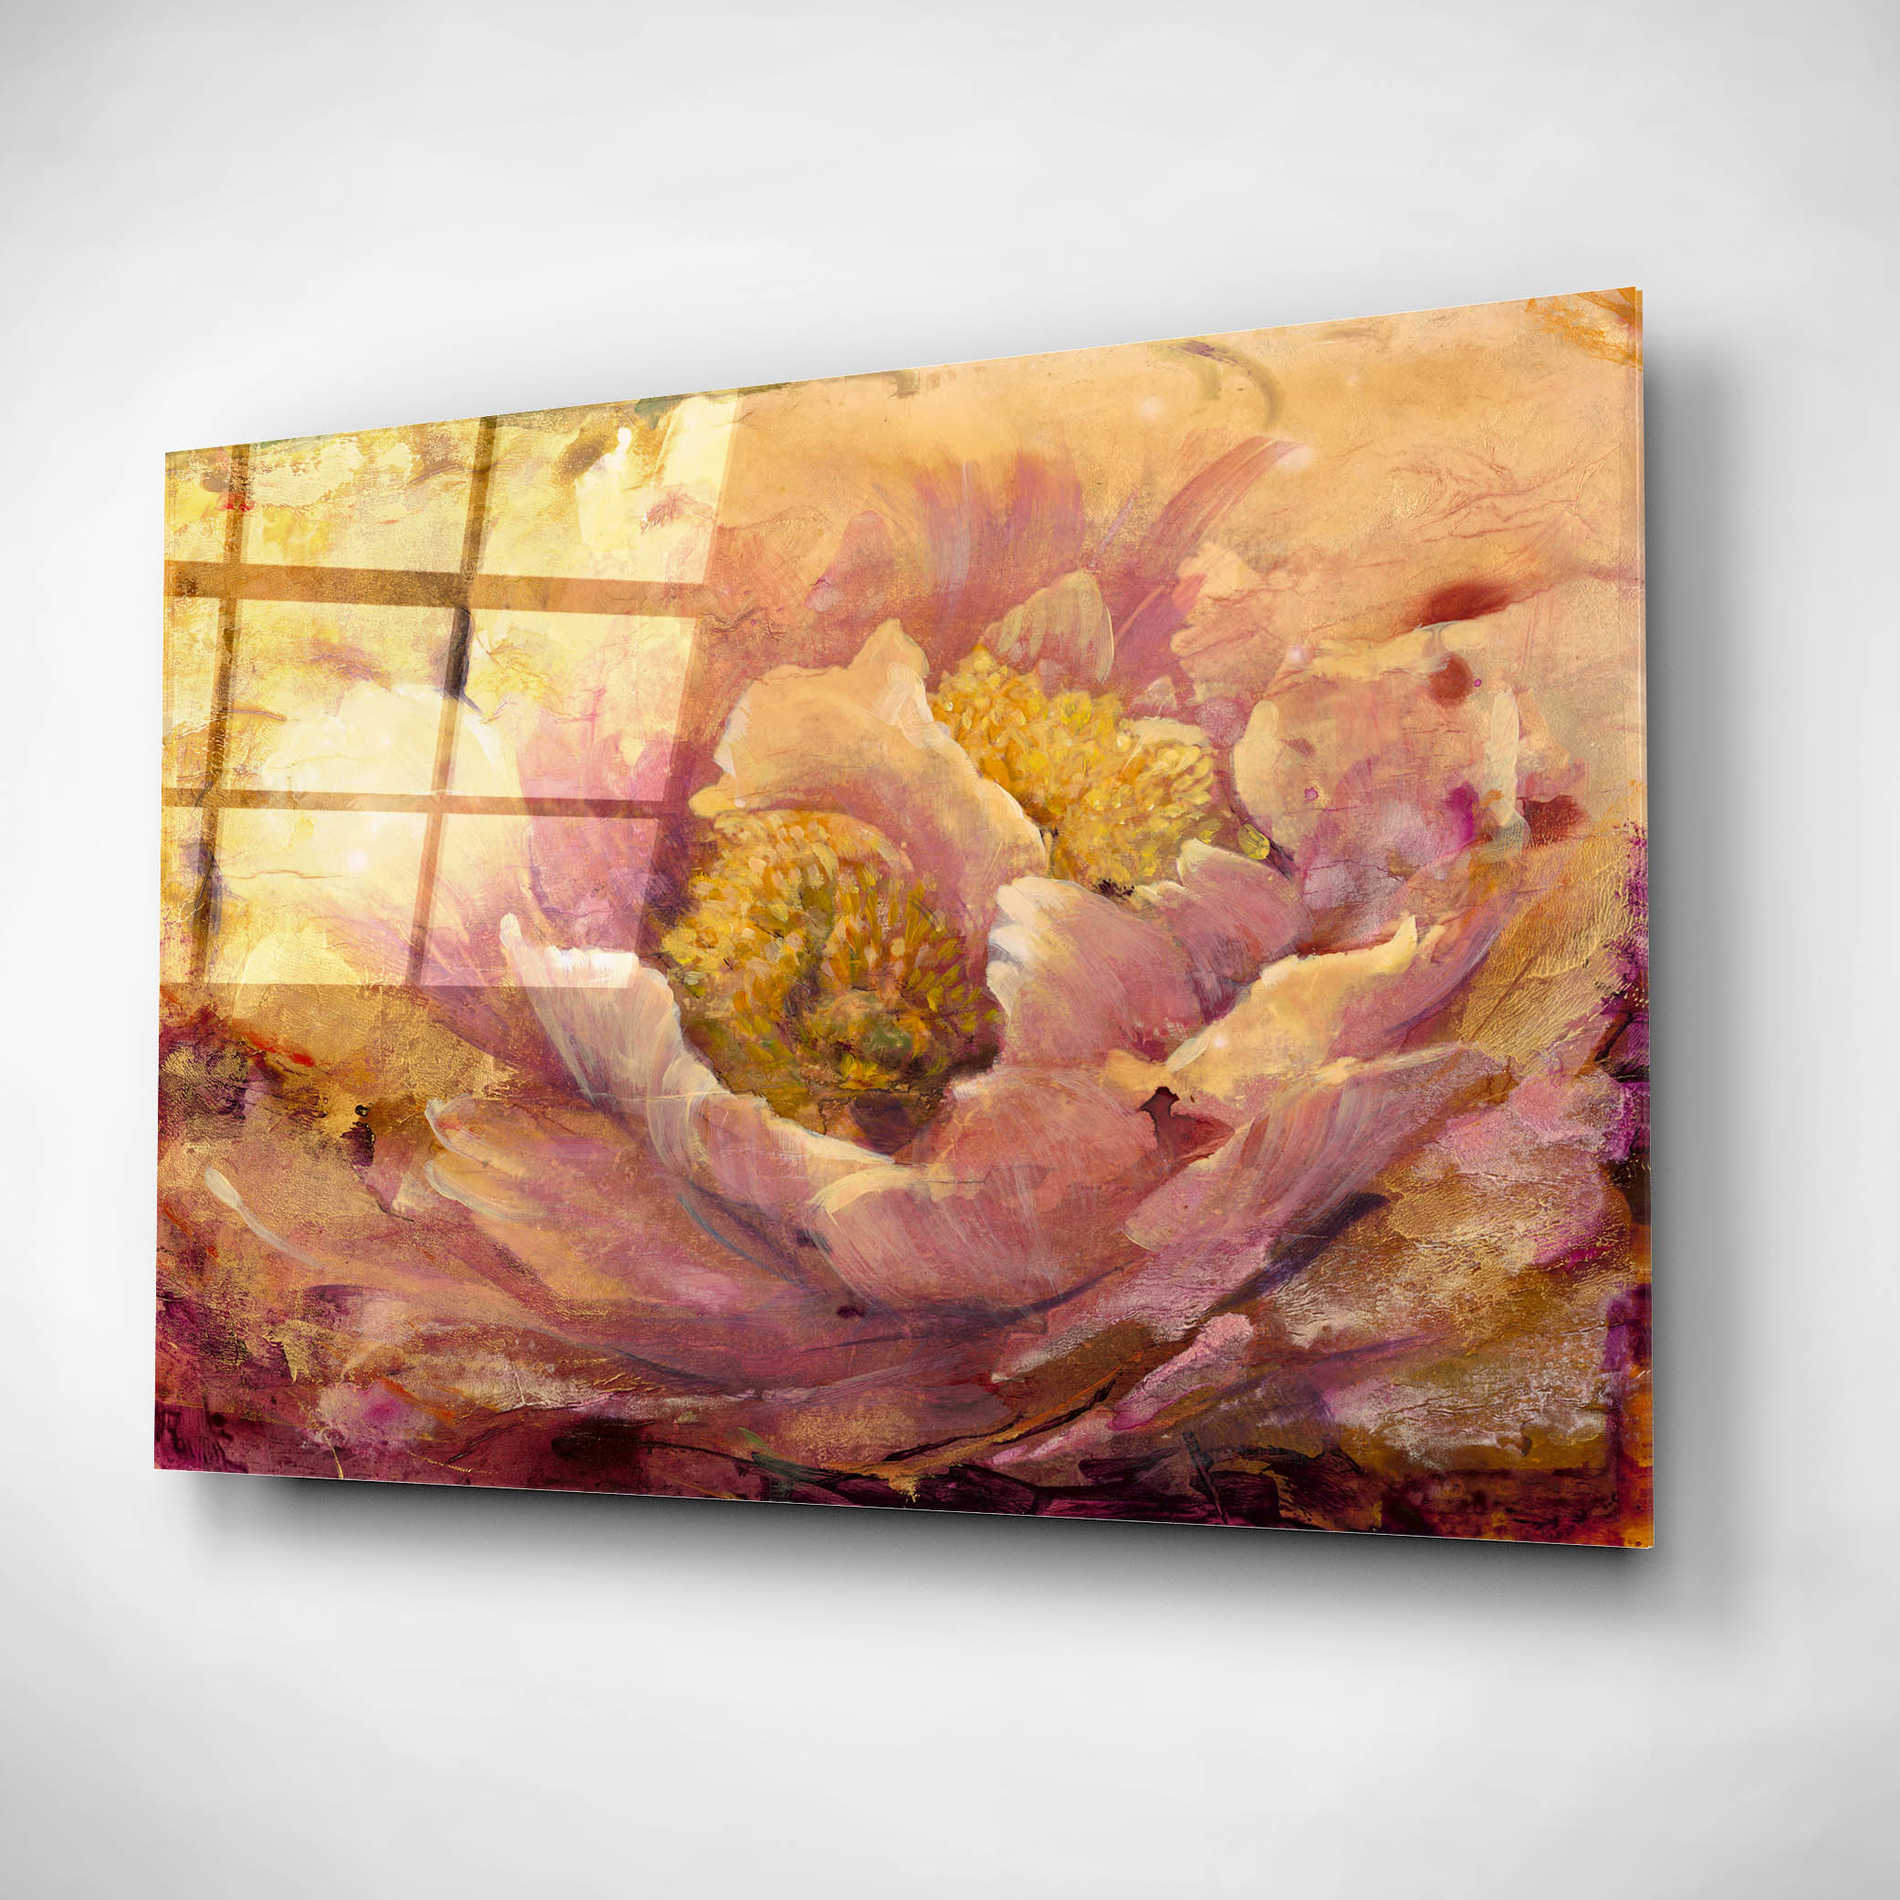 Epic Art 'Floral in Bloom I' by Tim O'Toole, Acrylic Glass Wall Art,16x12